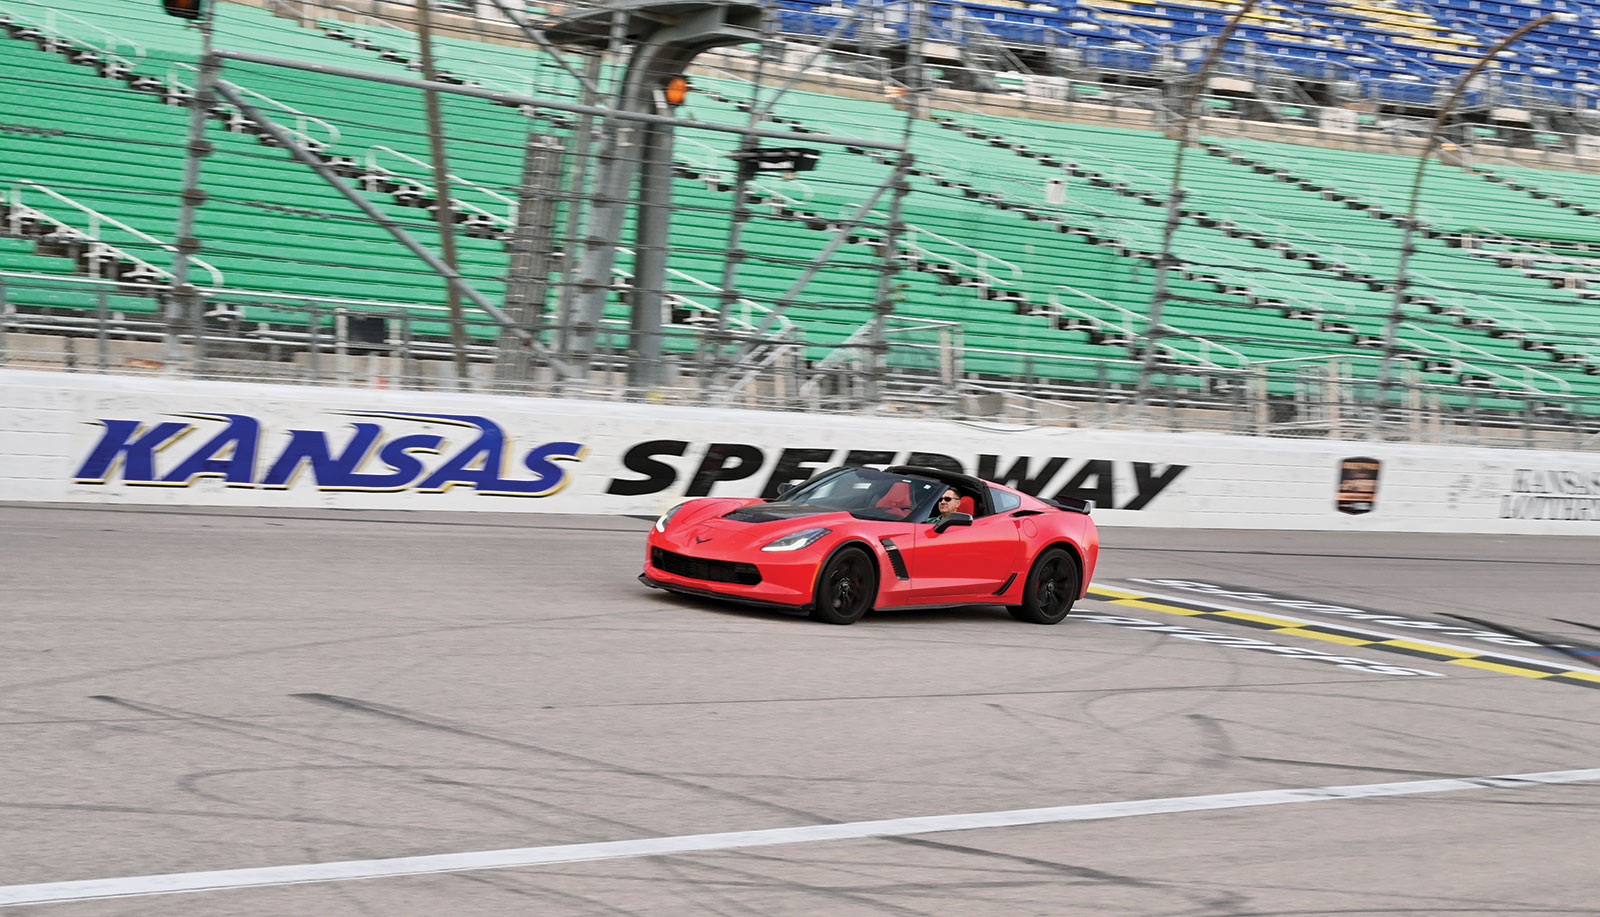 CGSC Foundation trustee Pat Proctor drives his Corvette on the track during the CGSC Foundation’s event on Oct. 21, 2022.